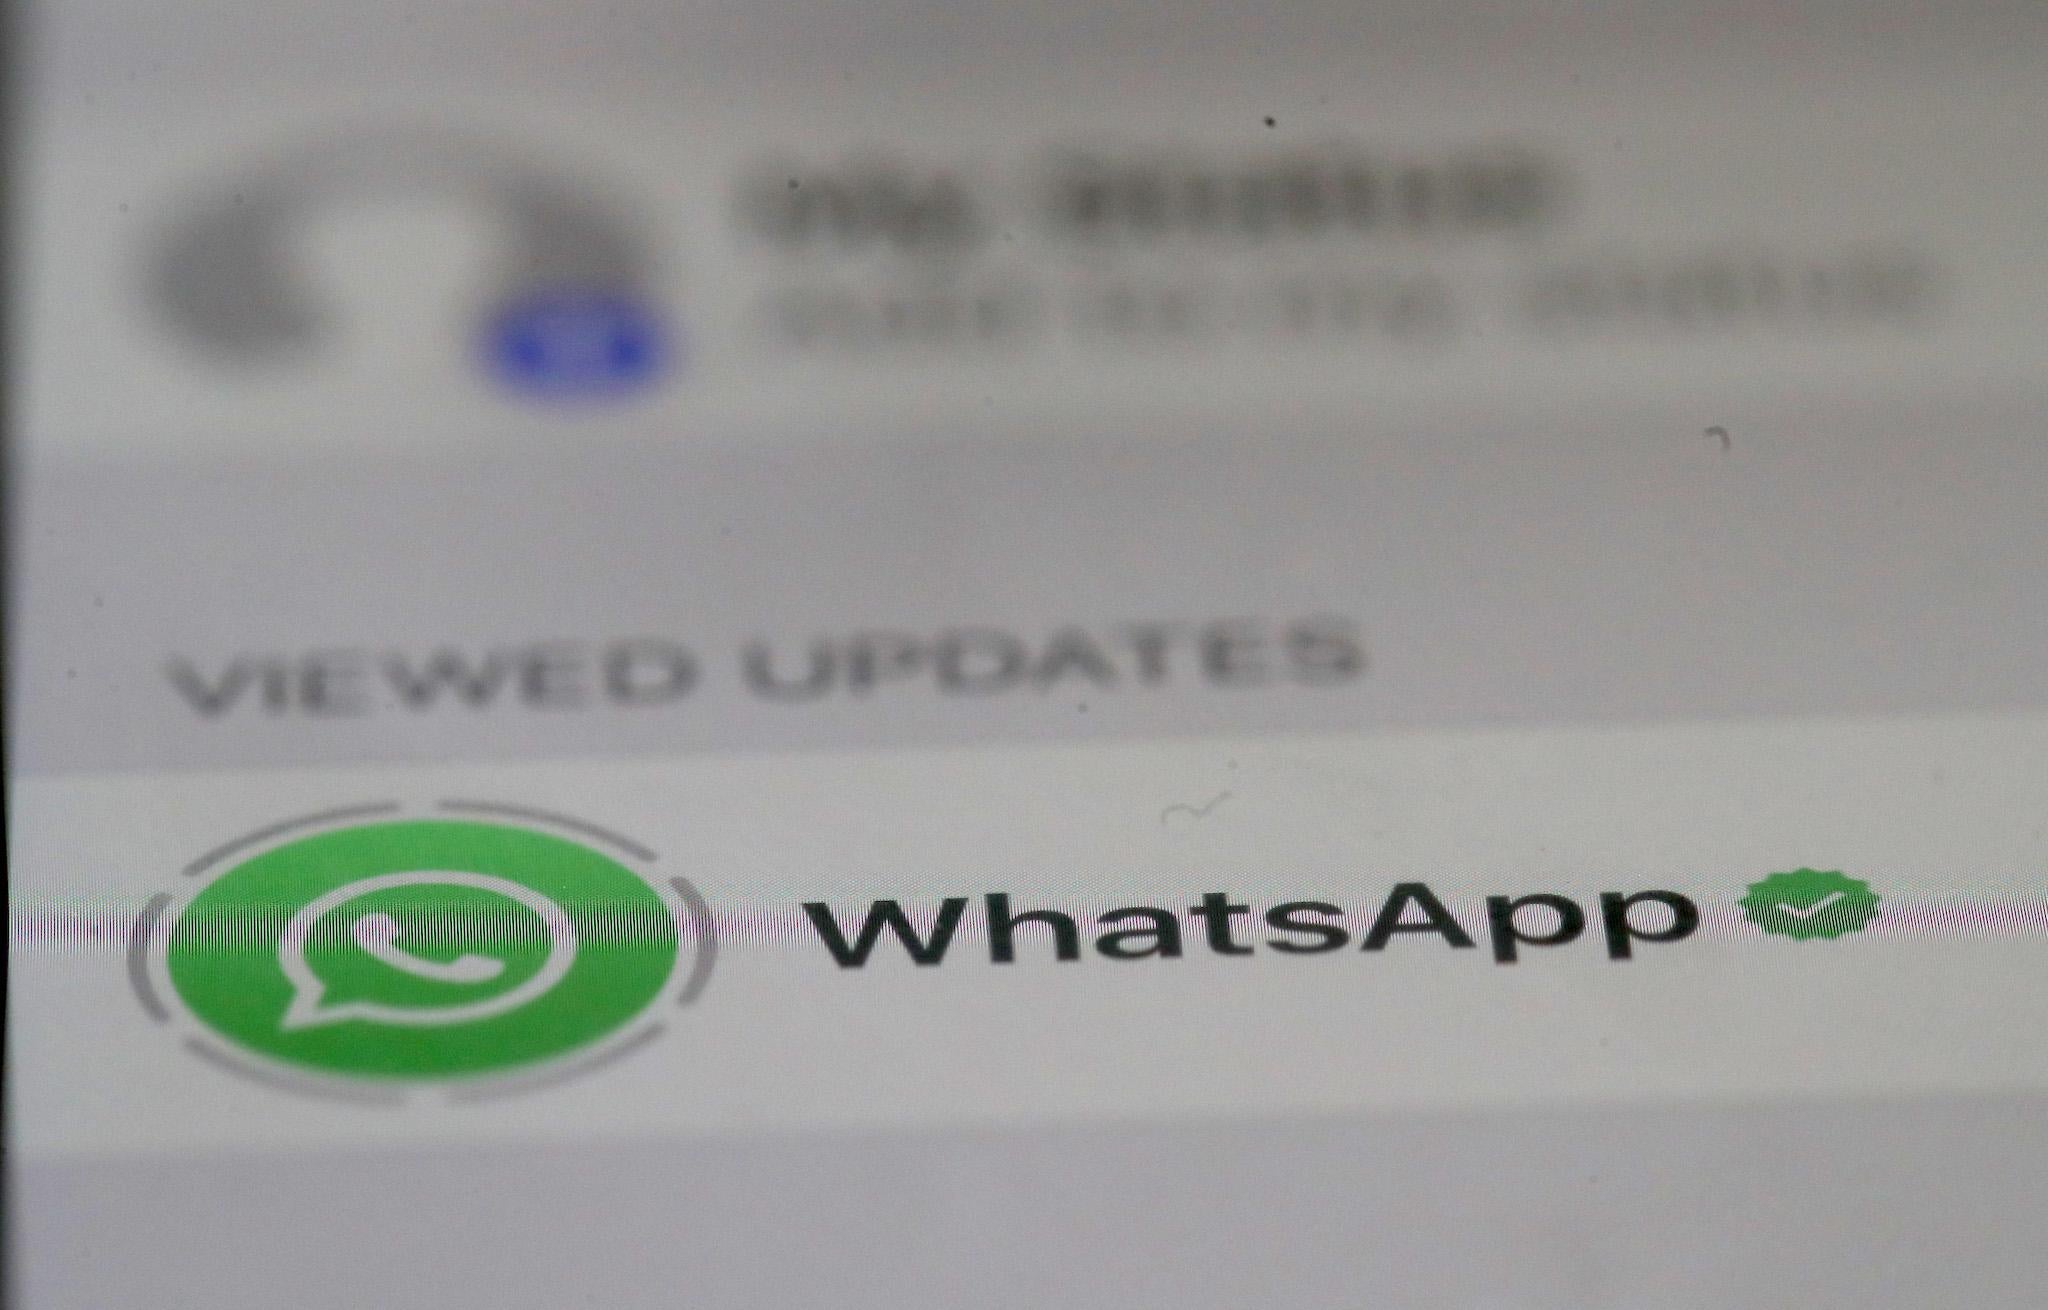 WhatsApp bug could let strangers see your personal files The